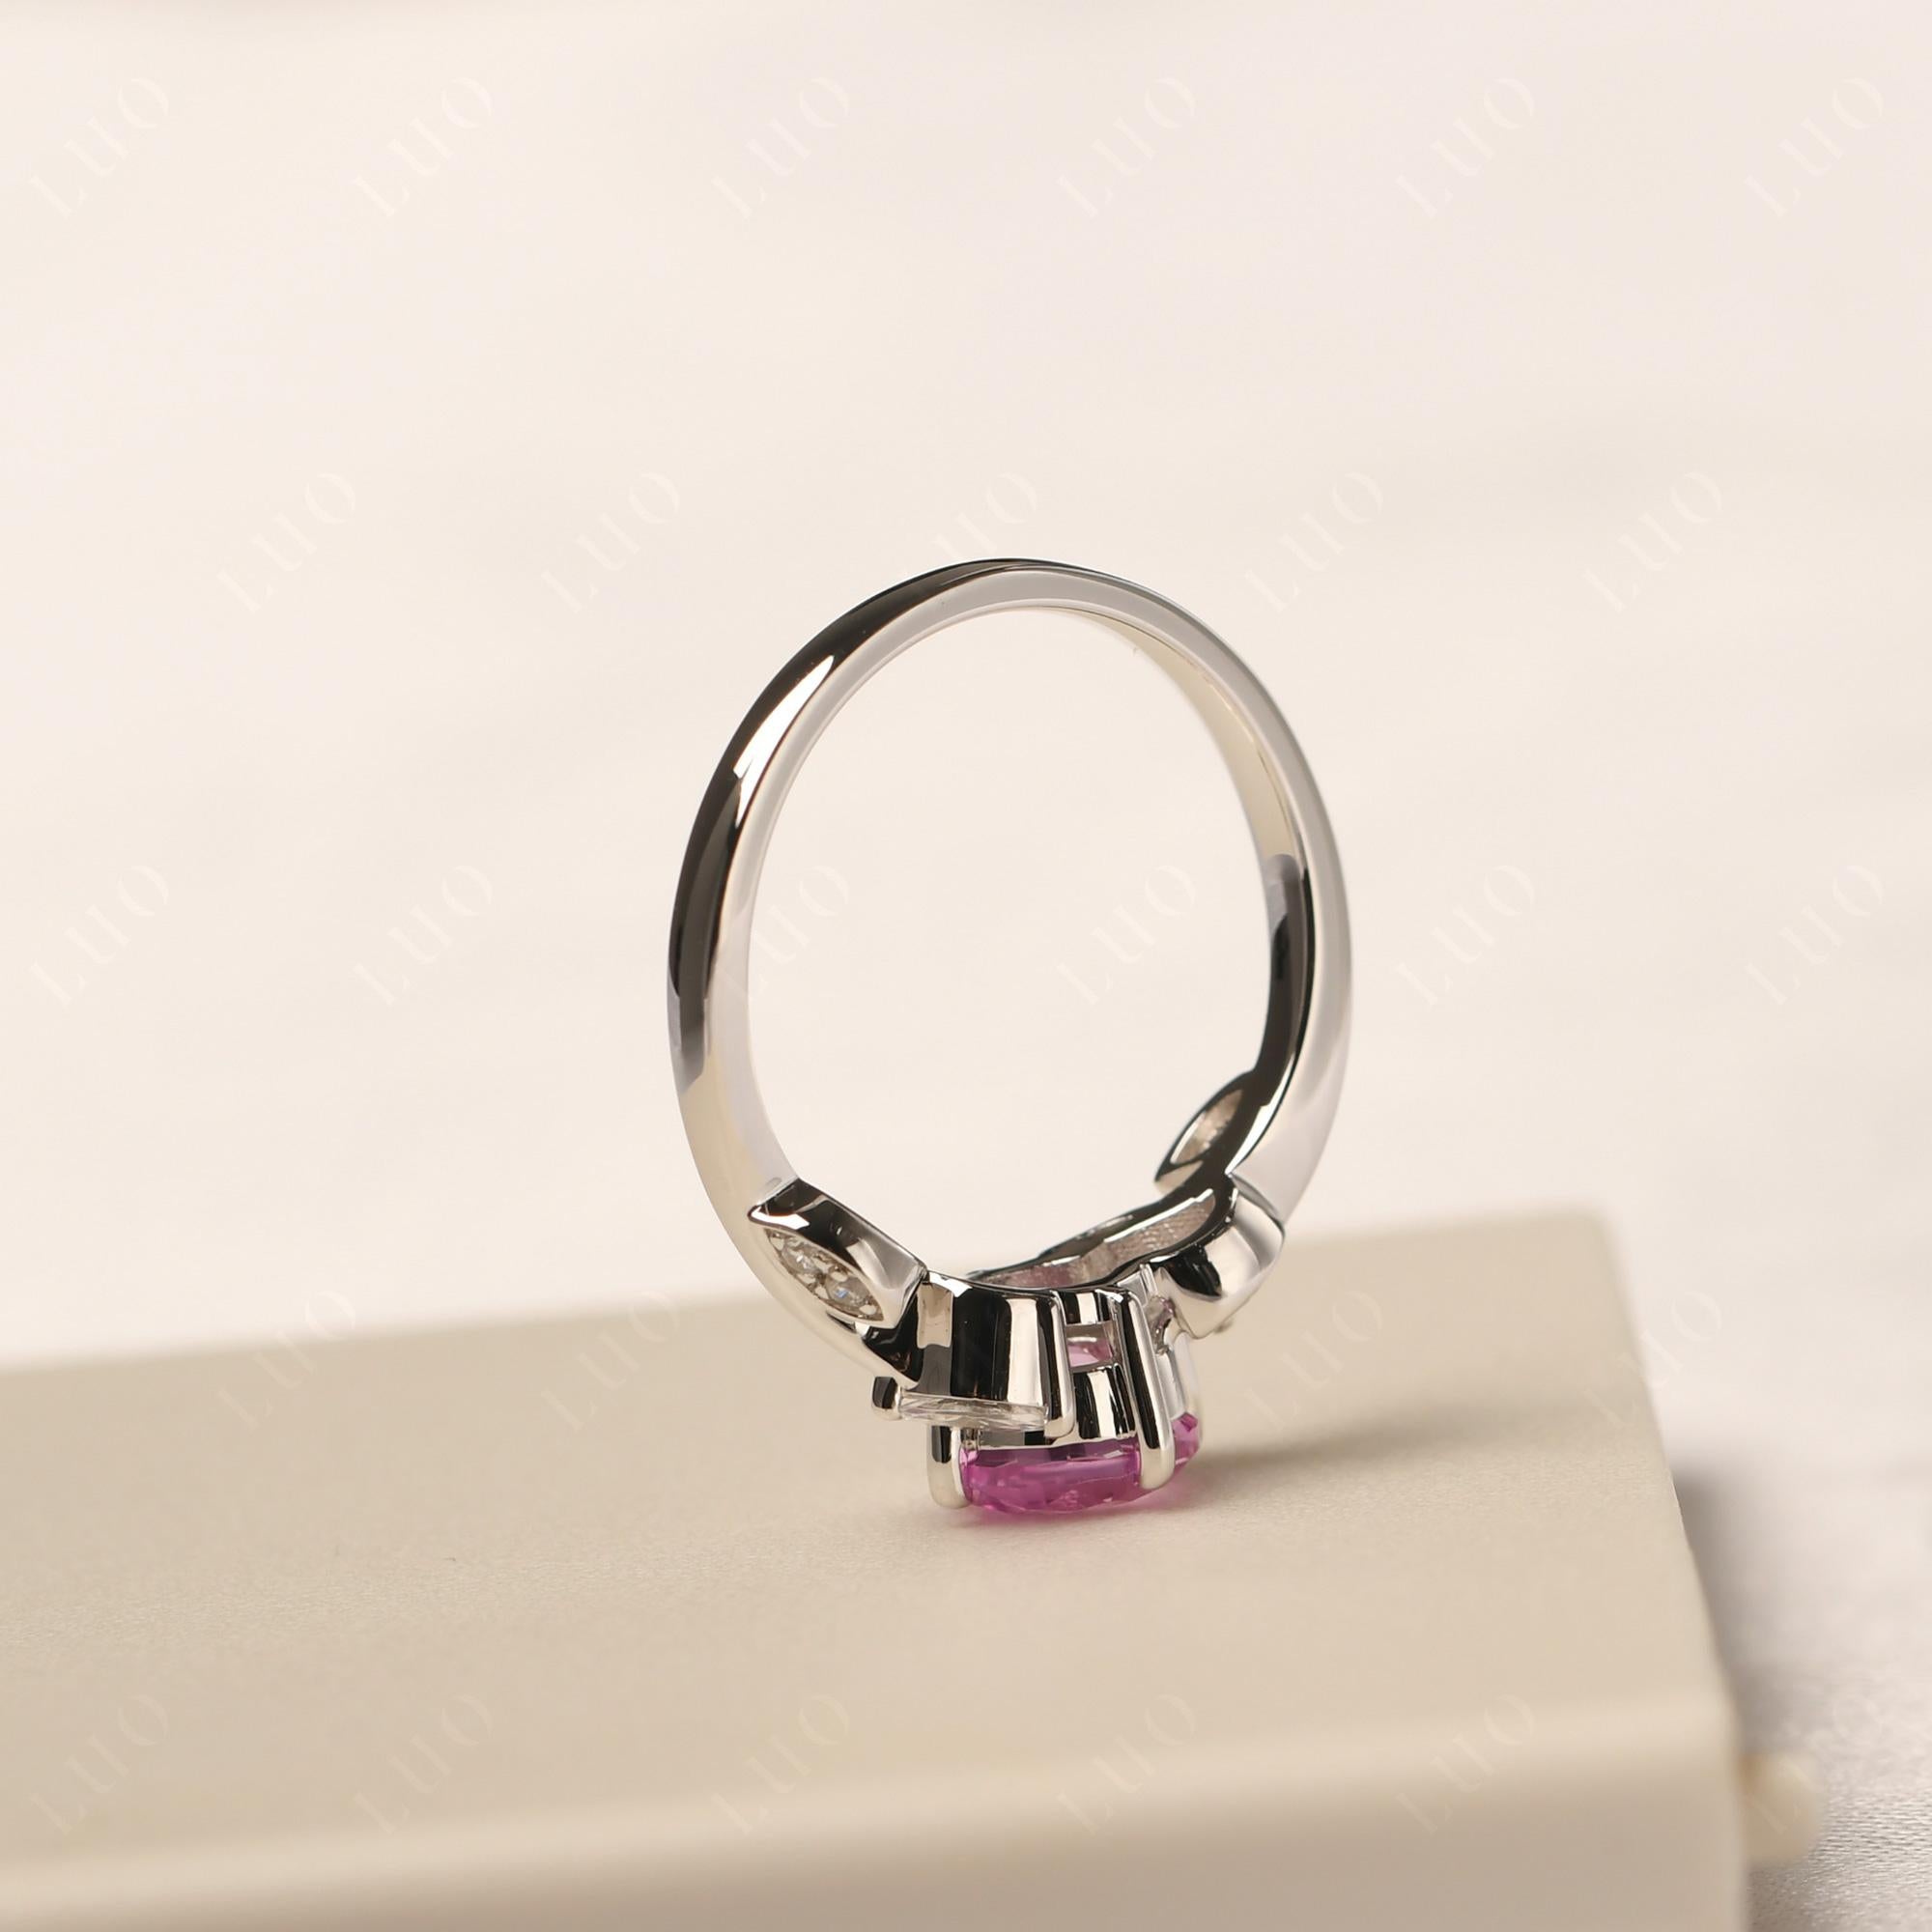 Vine Leaf Pink Sapphire Engagement Ring - LUO Jewelry